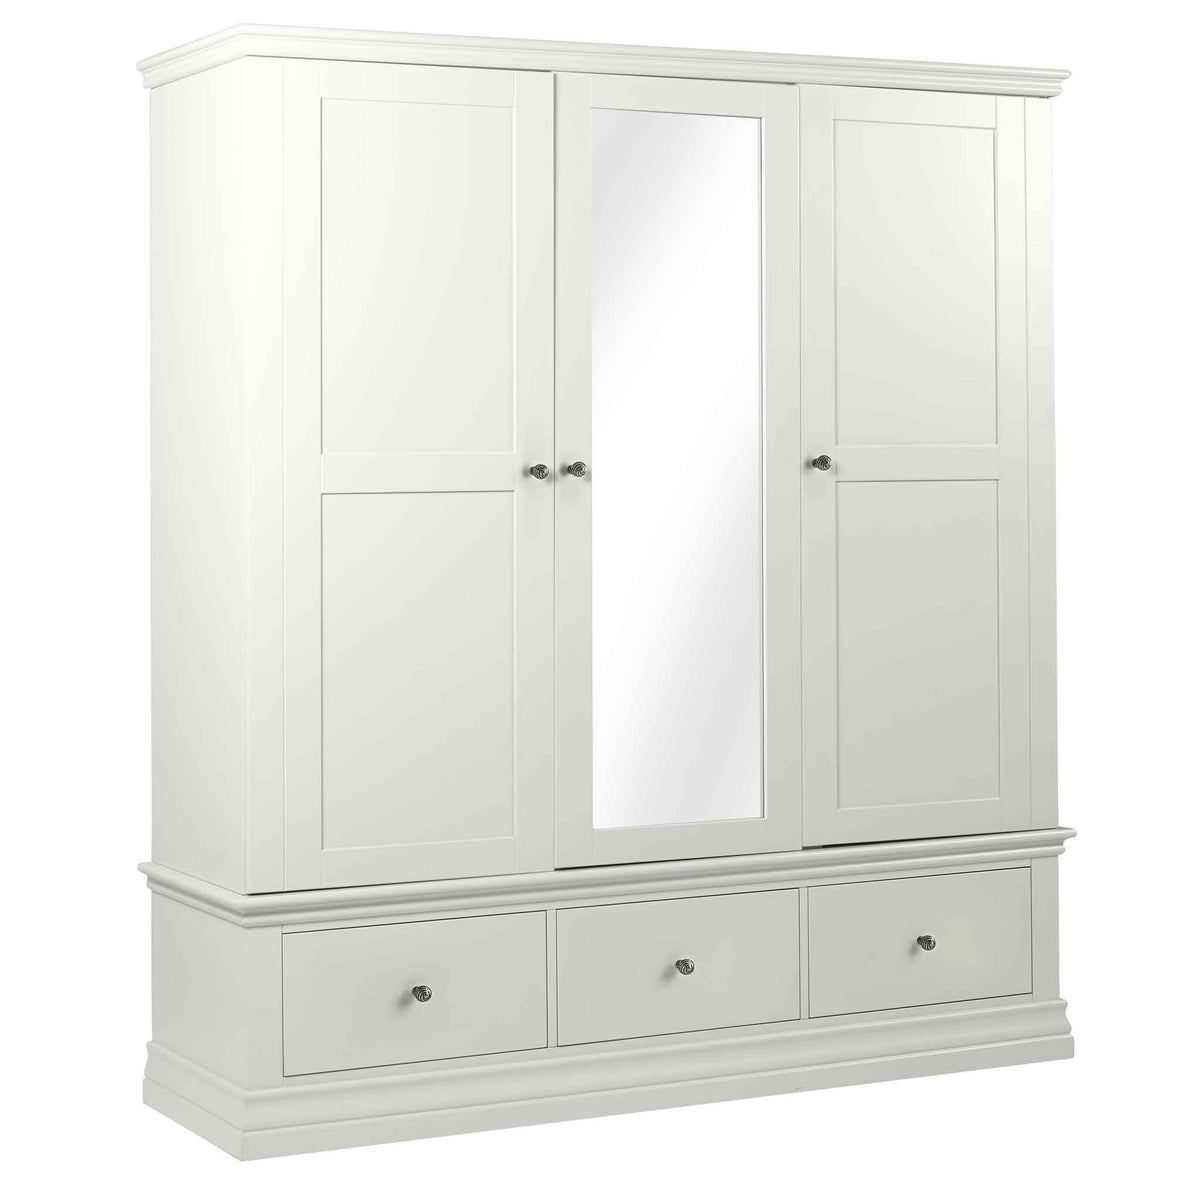 Melrose White Triple Wardrobe with Mirror and Drawers from Roseland Furniture